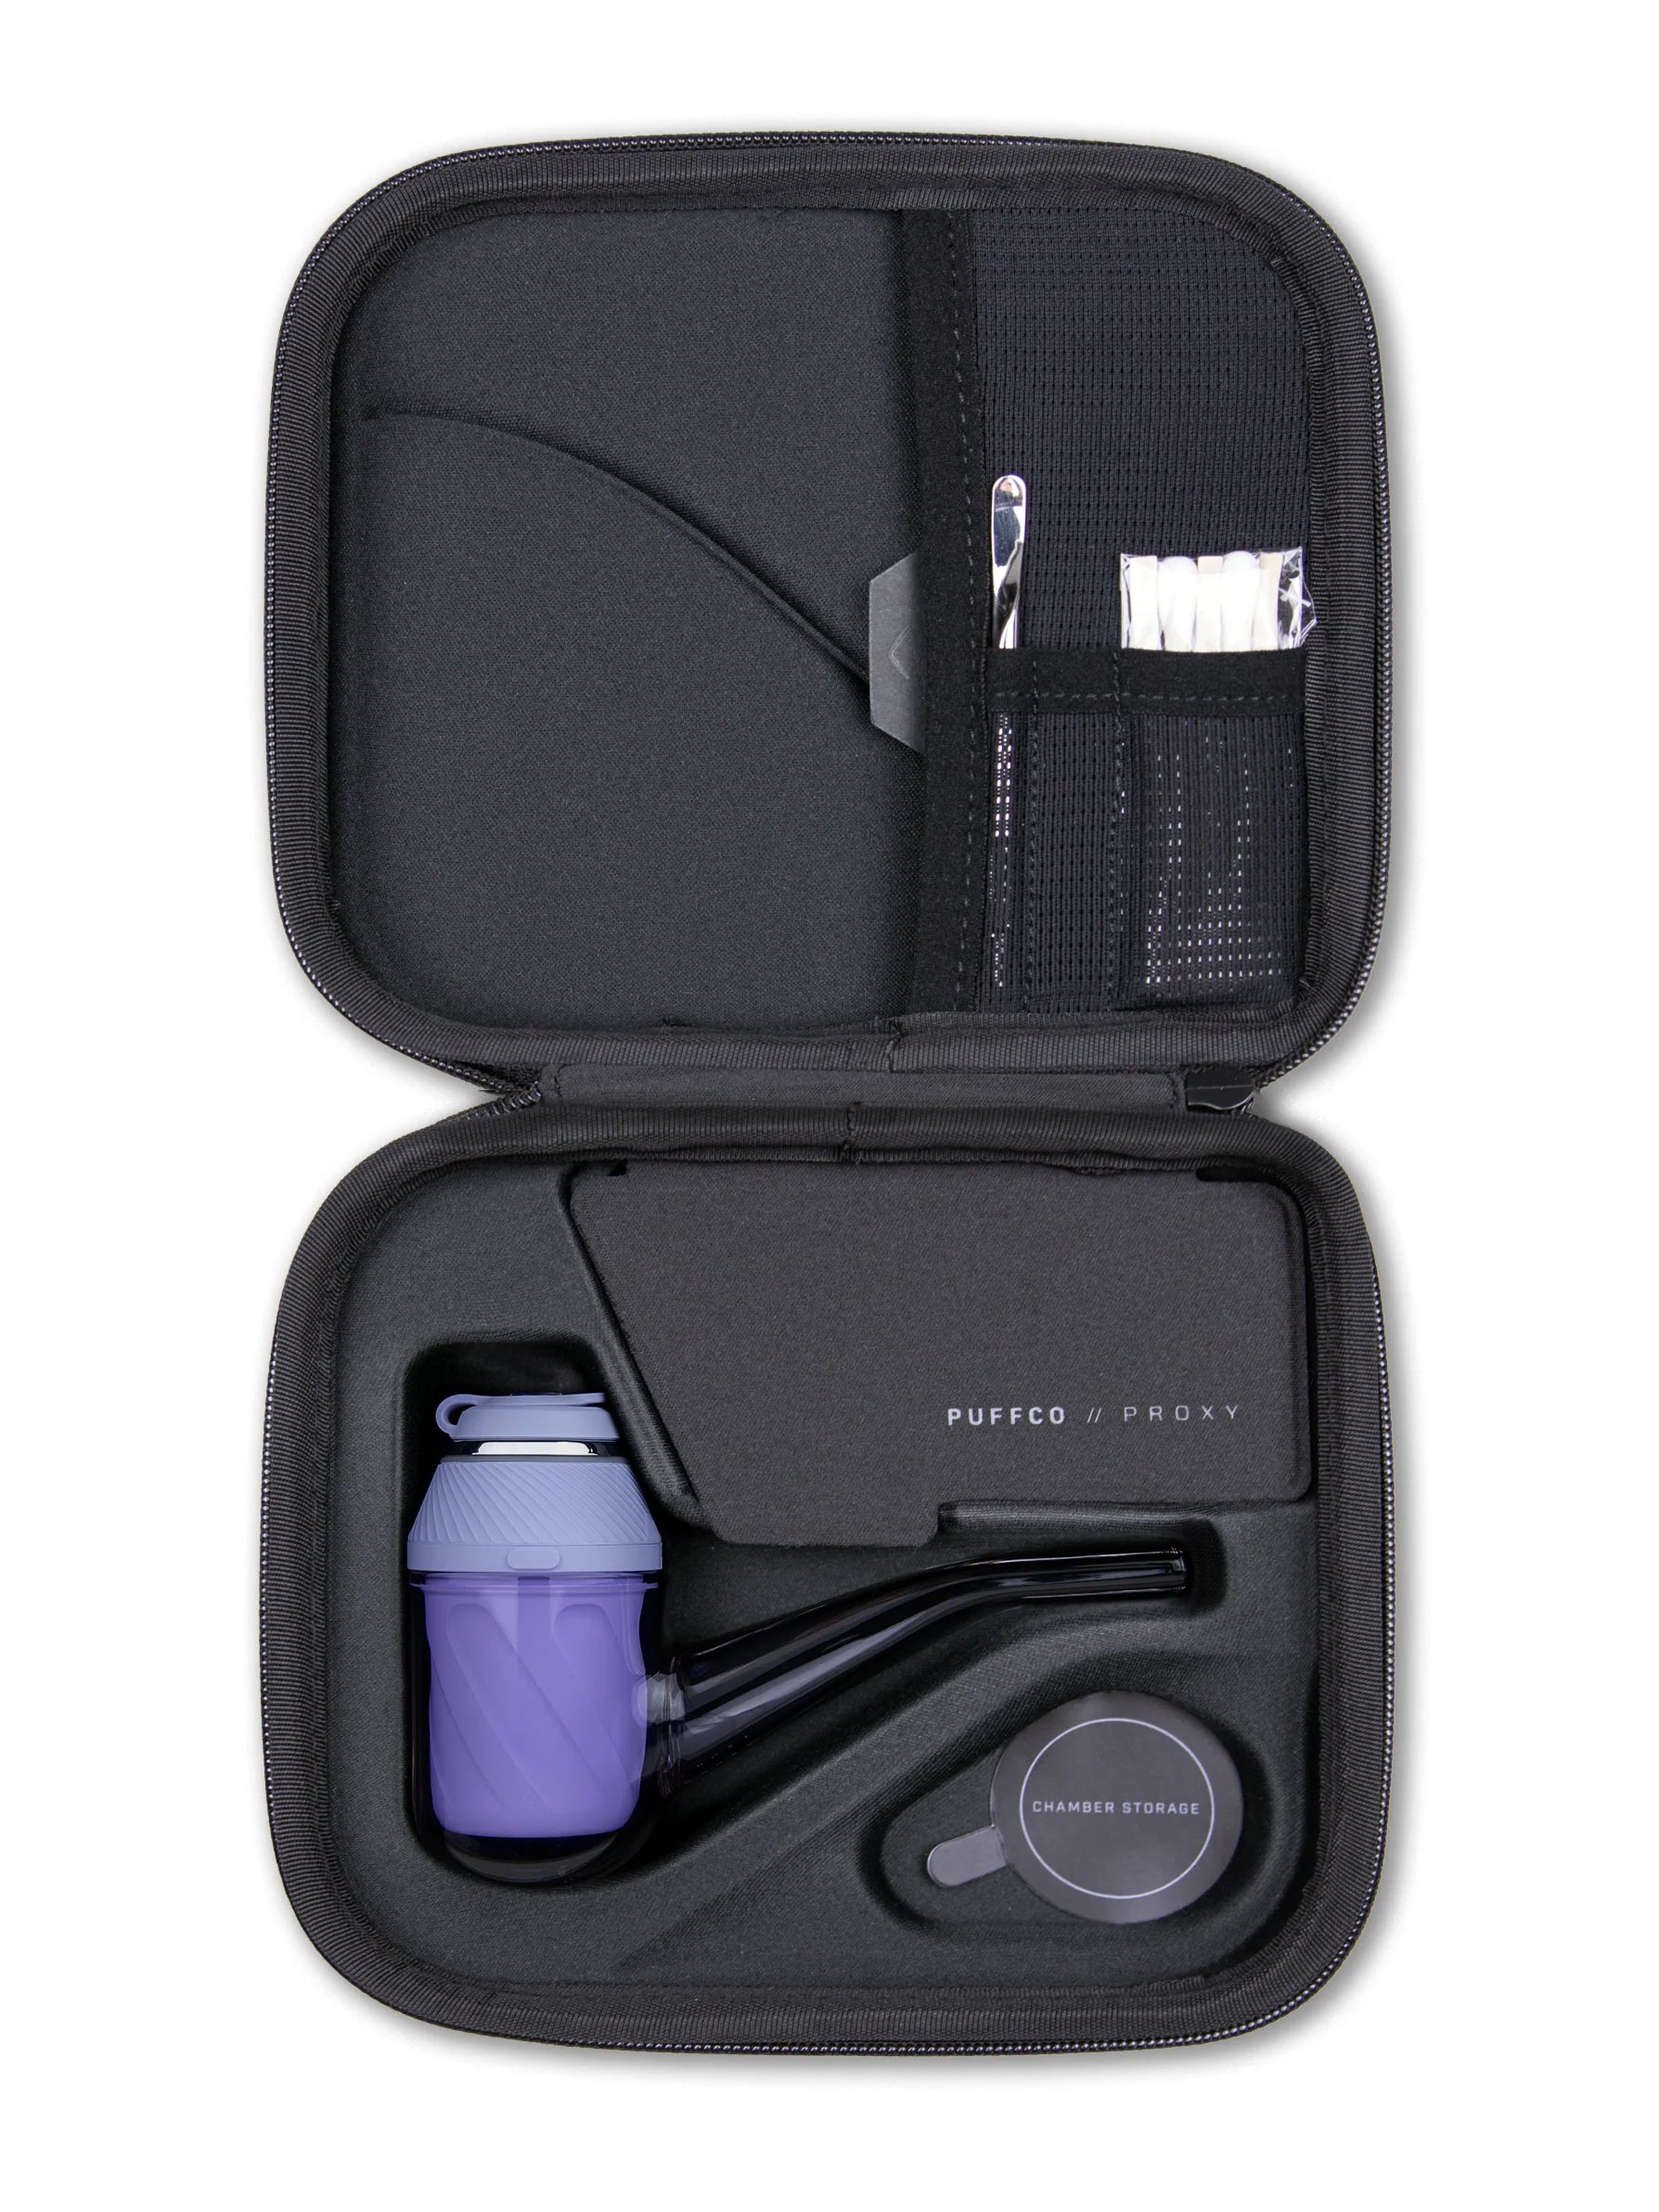 Puffco Proxy Kit Portable Vaporizer for Concentrates